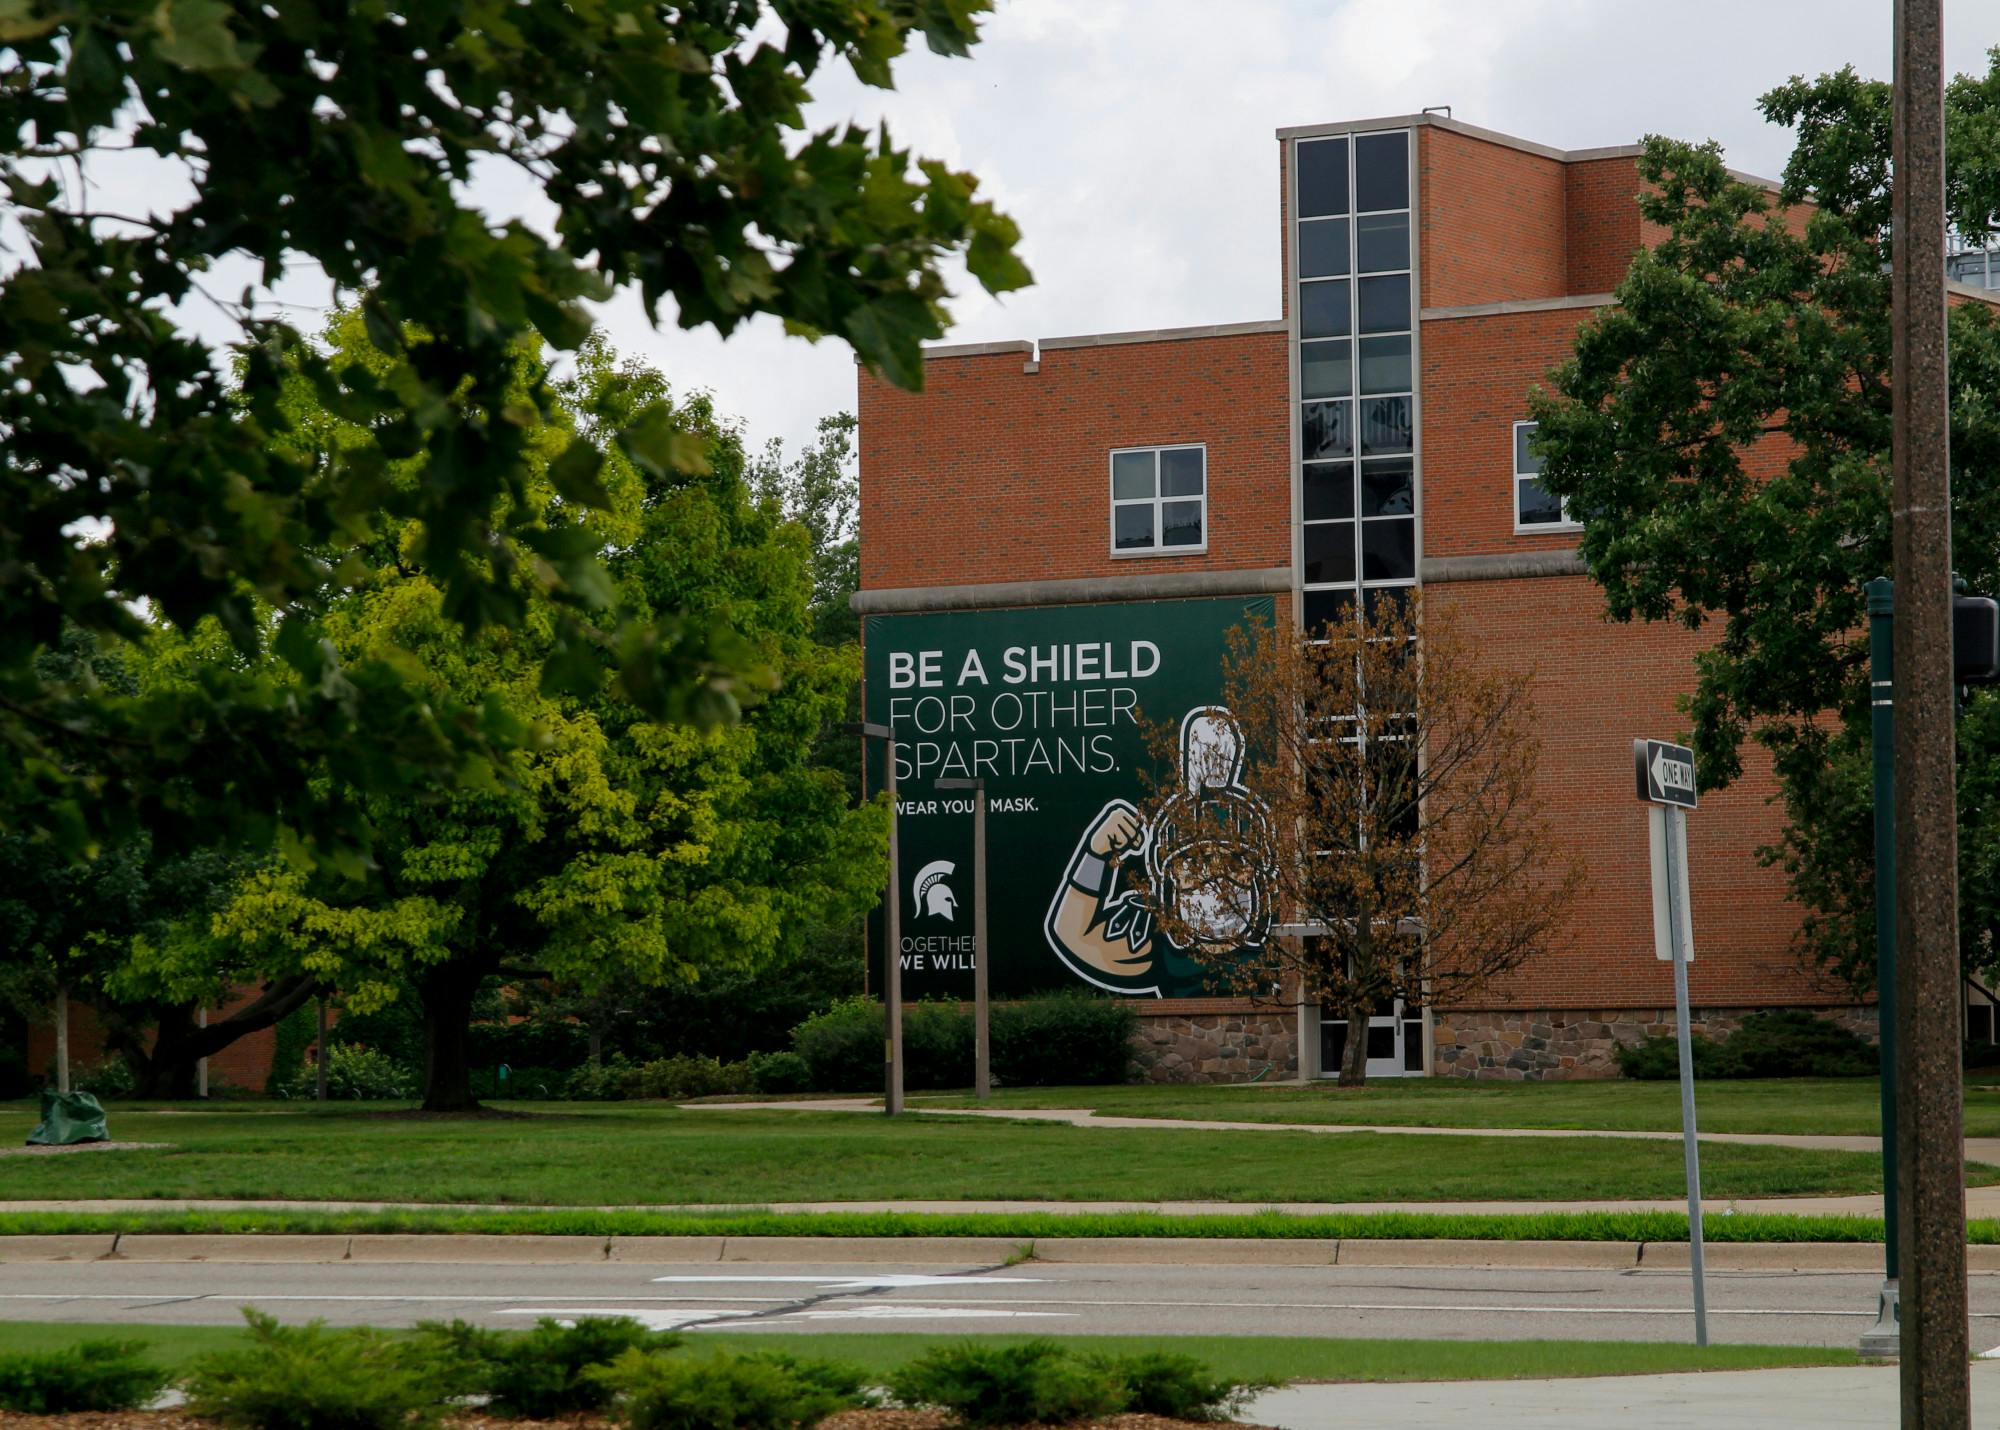 <p>Reminders to wear masks and practice good hygiene are sprinkled around campus to “shield” fellow Spartans from COVID-19. The university has announced that it will require vaccinations going into the fall 2021 semester.&nbsp;</p>